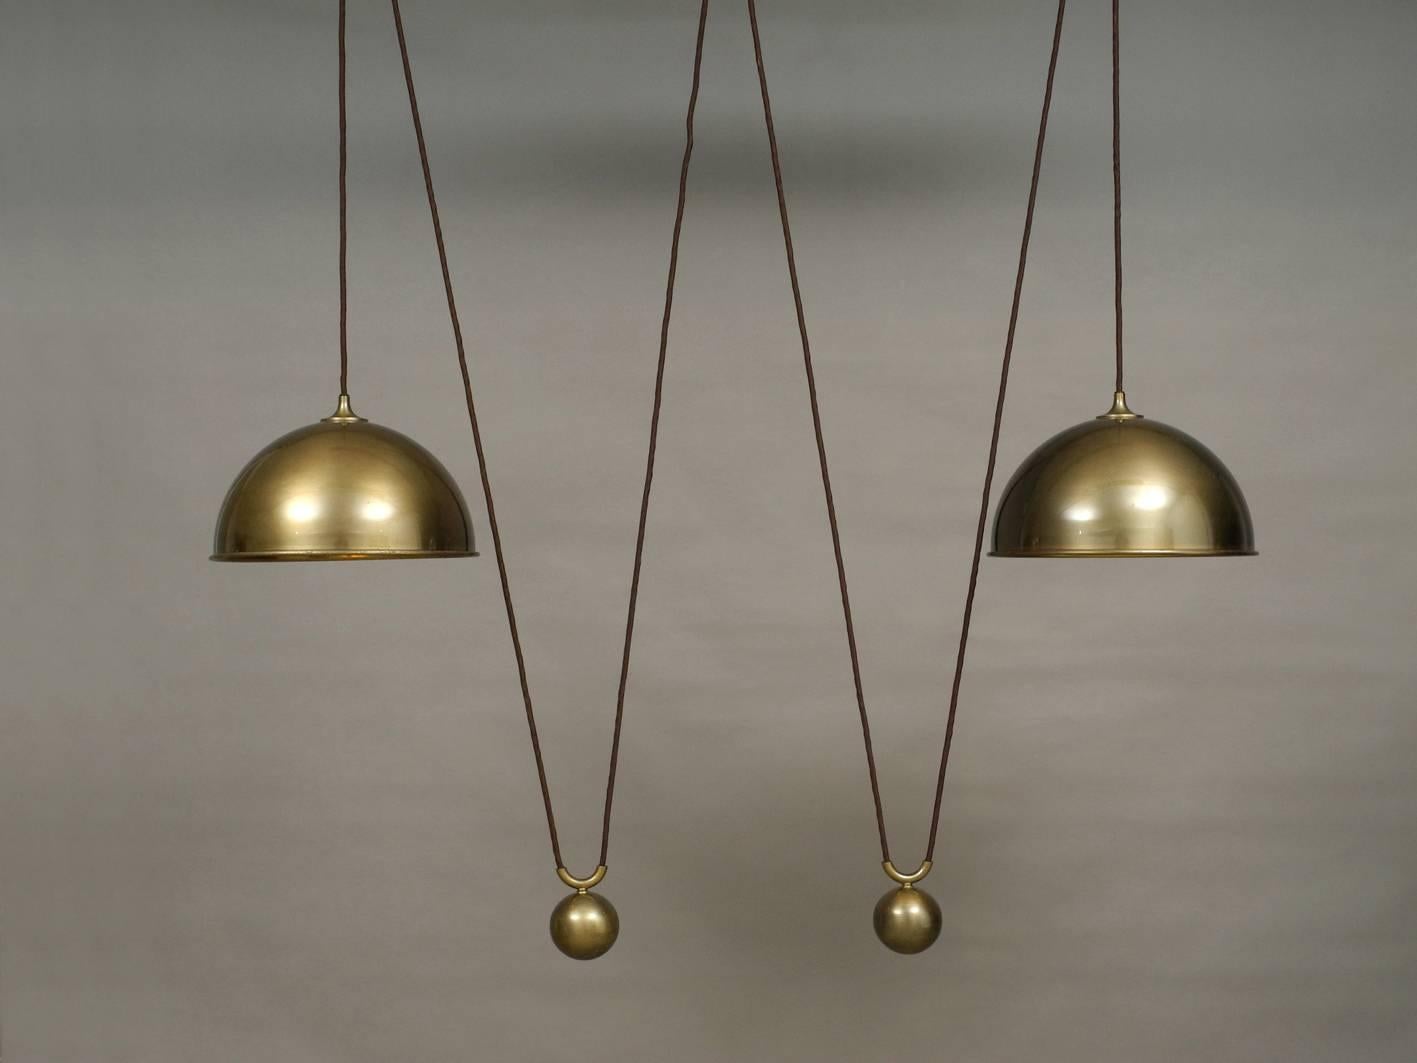 Imposing 1970s original Florian Schulz double drawbar ceiling lamp made of heavy dark brass. Individually adjustable to every height. Heavy pendulum weights.
Very elegant minimalistic design. A classic among the lamps by Florian Schulz and very